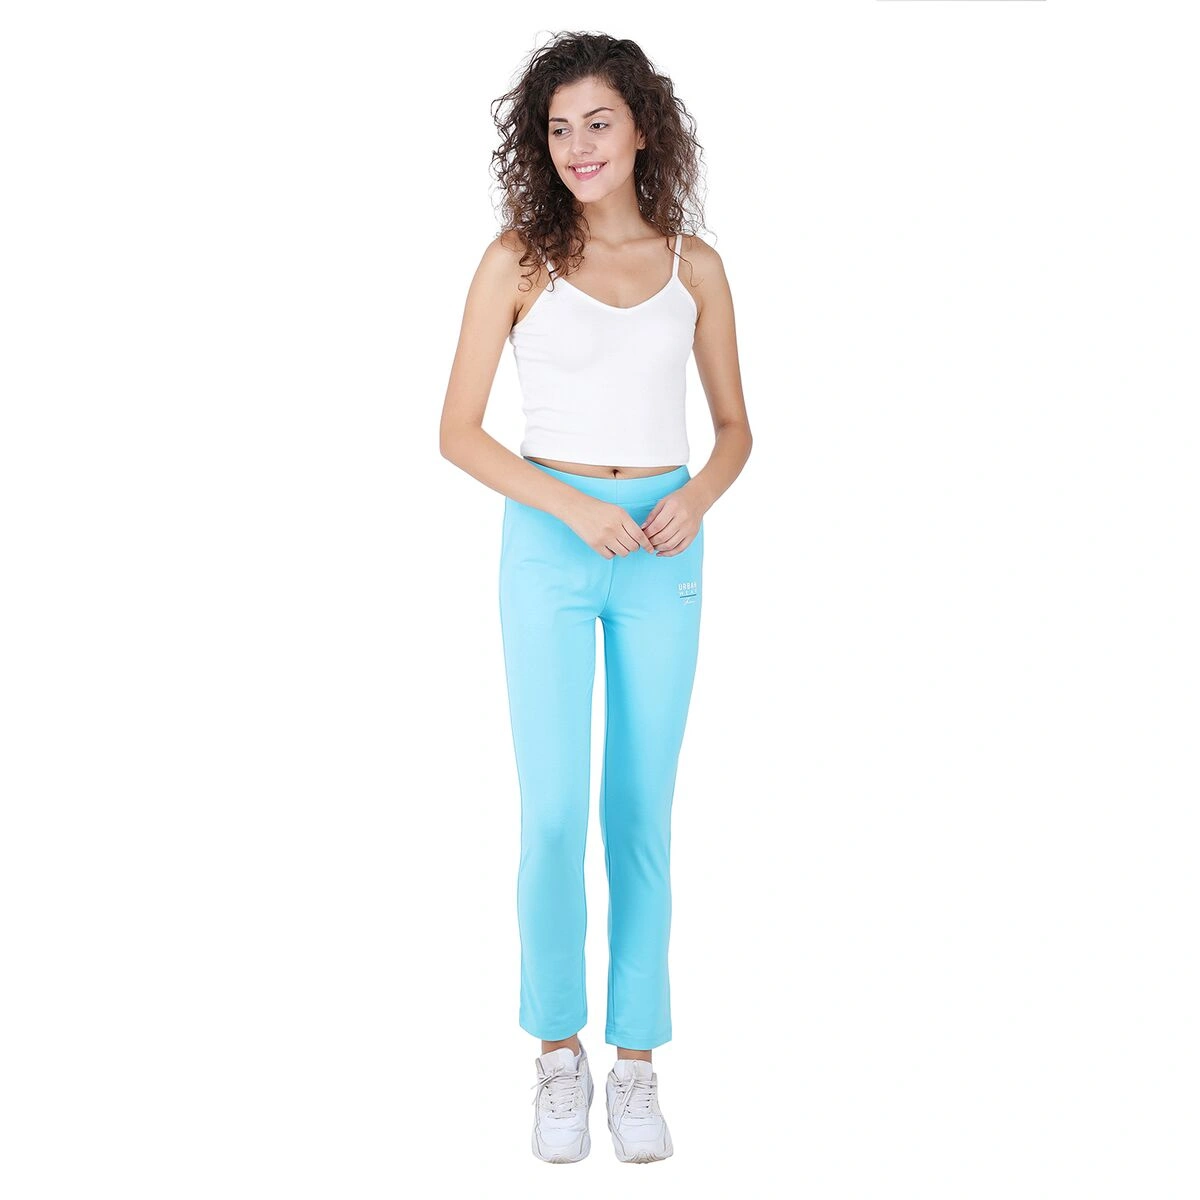 Buy Blue Sky Blue Trouser Cotton Pants for Best Price, Reviews, Free  Shipping